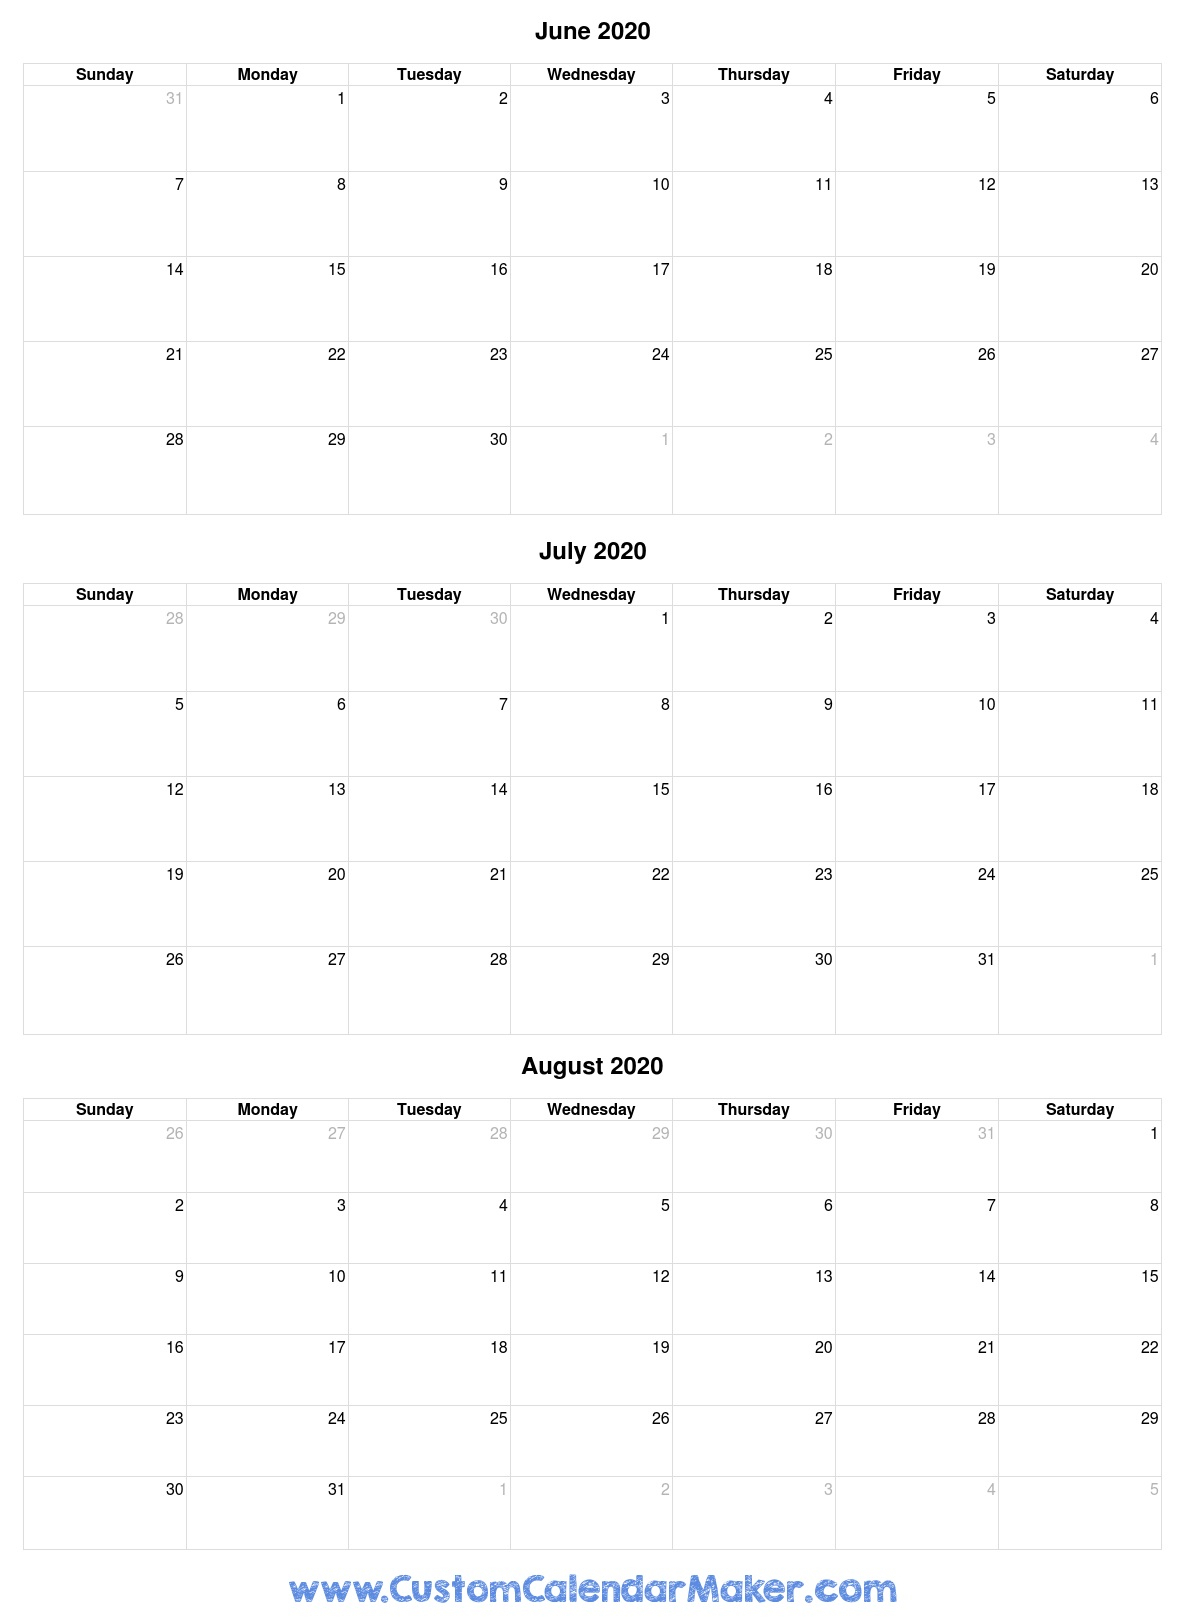 June To August 2020 Calendar within May June July August 2020 Calendar